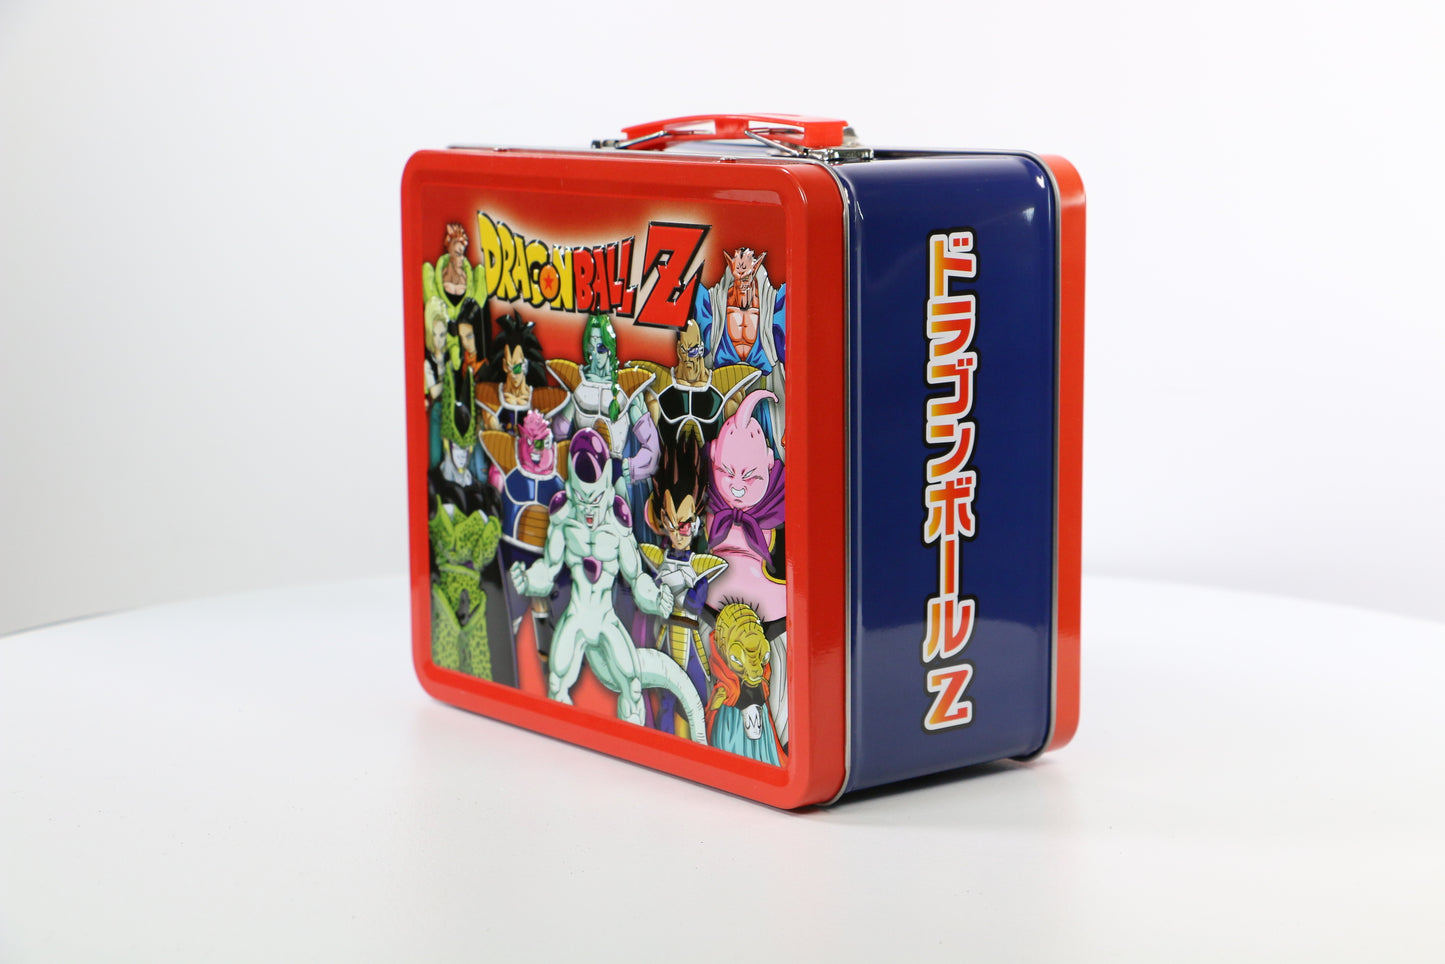 Tin Titans - Dragon Ball Z Fighters Lunch Box w/ Beverage Container - Previews Exclusive